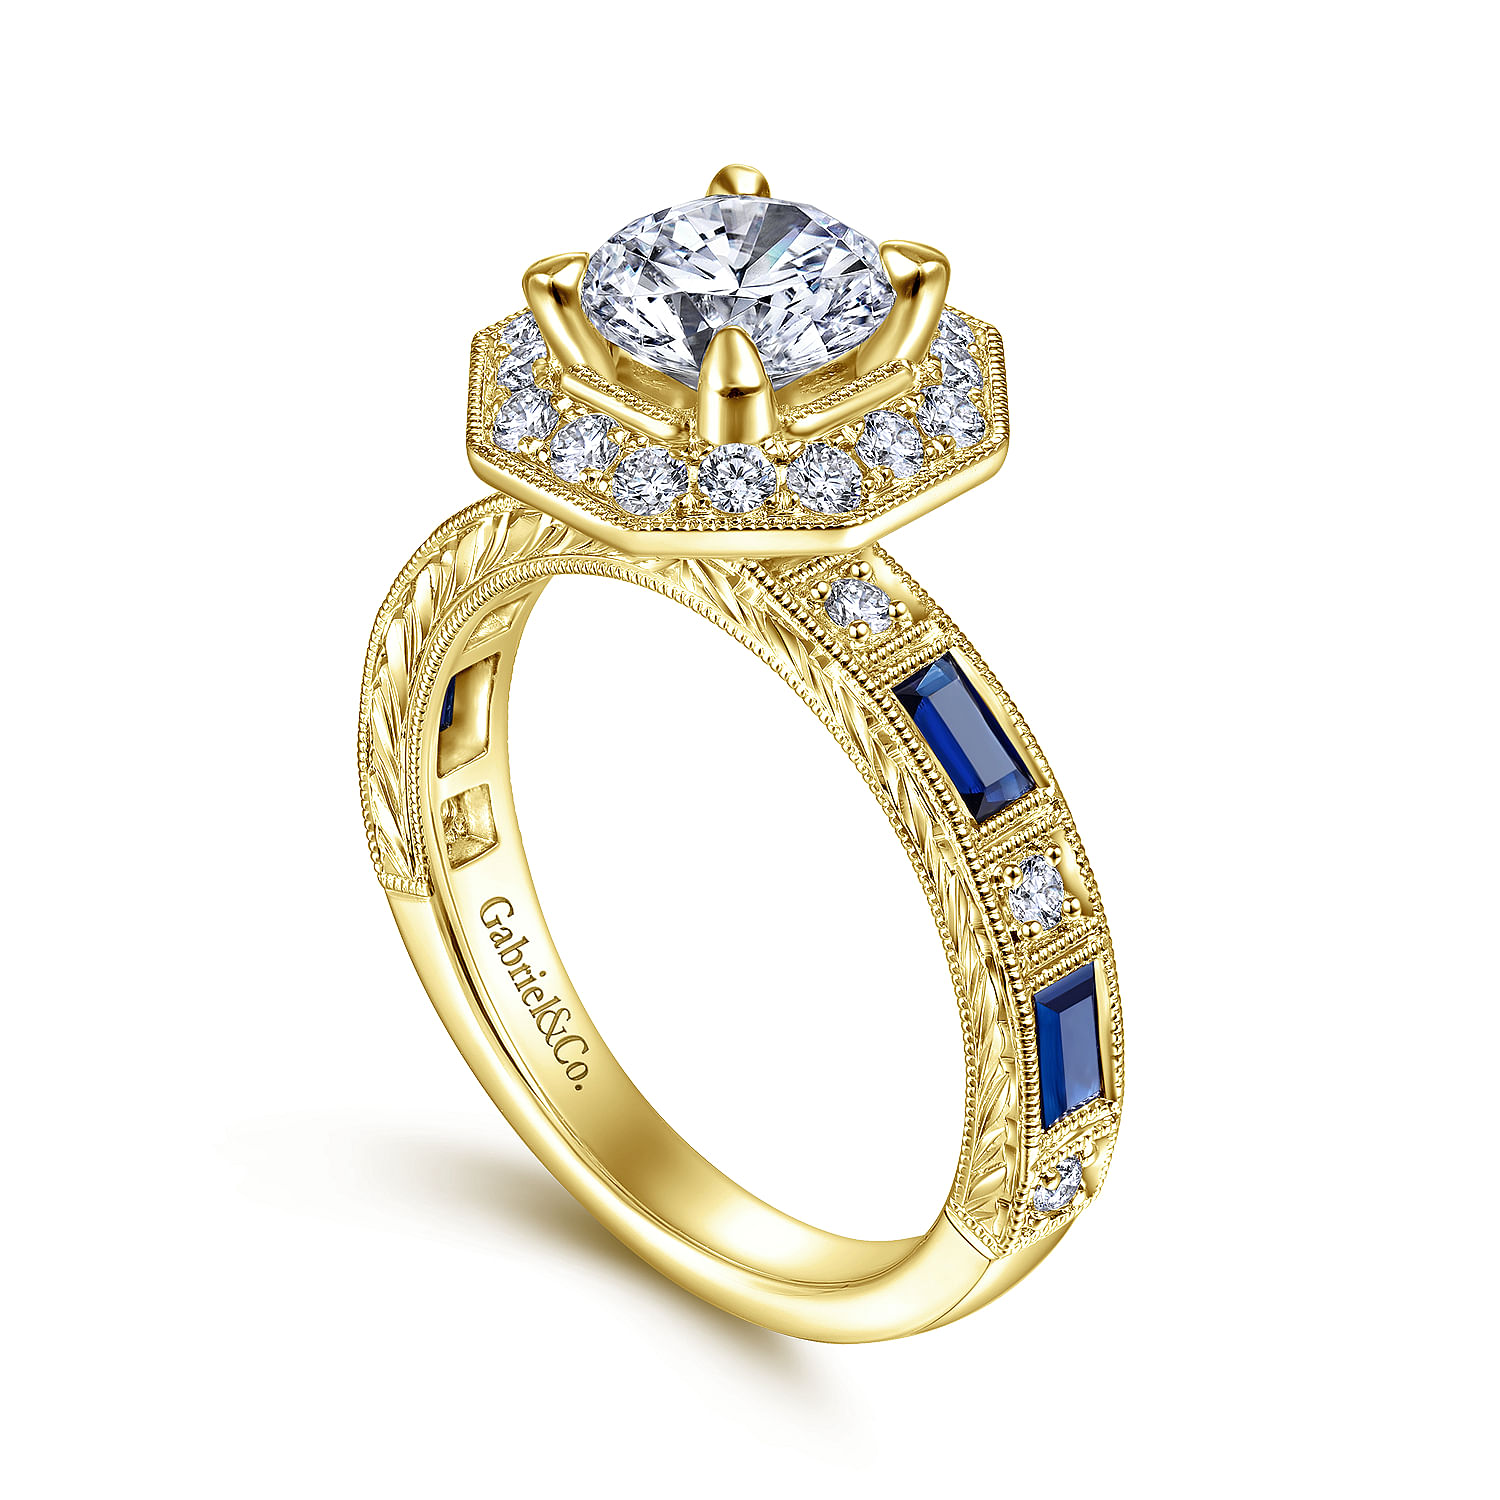 Art Deco 14K Yellow Gold Octagonal Halo Round Sapphire and Diamond Engagement Ring